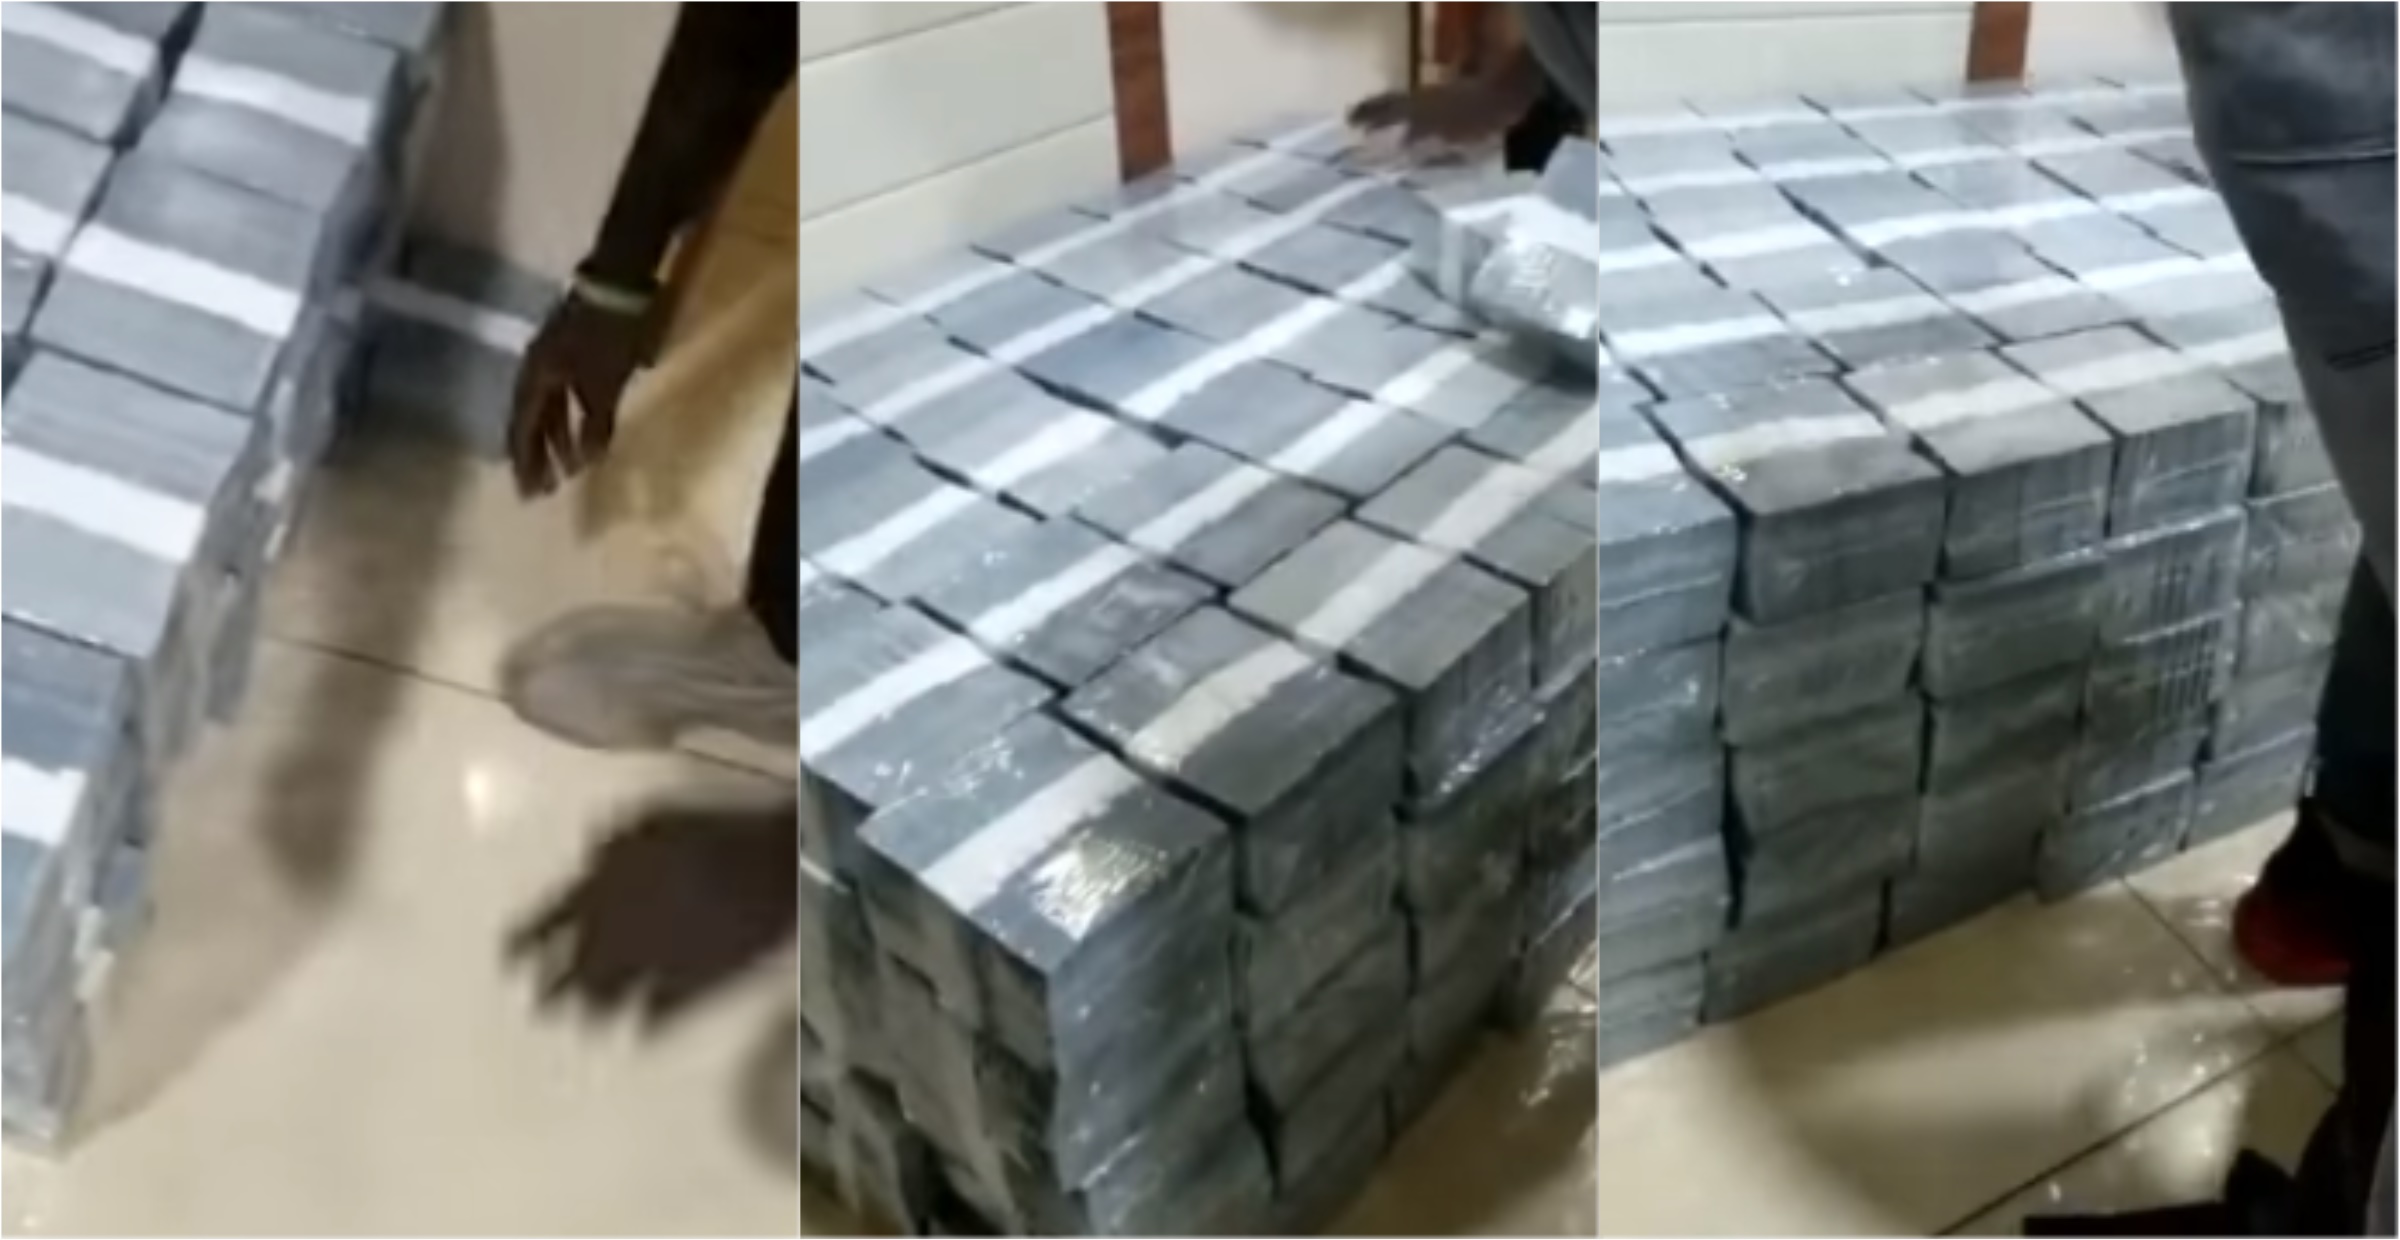 Video of house filled with bundles of cash with young men arranging monies emerges